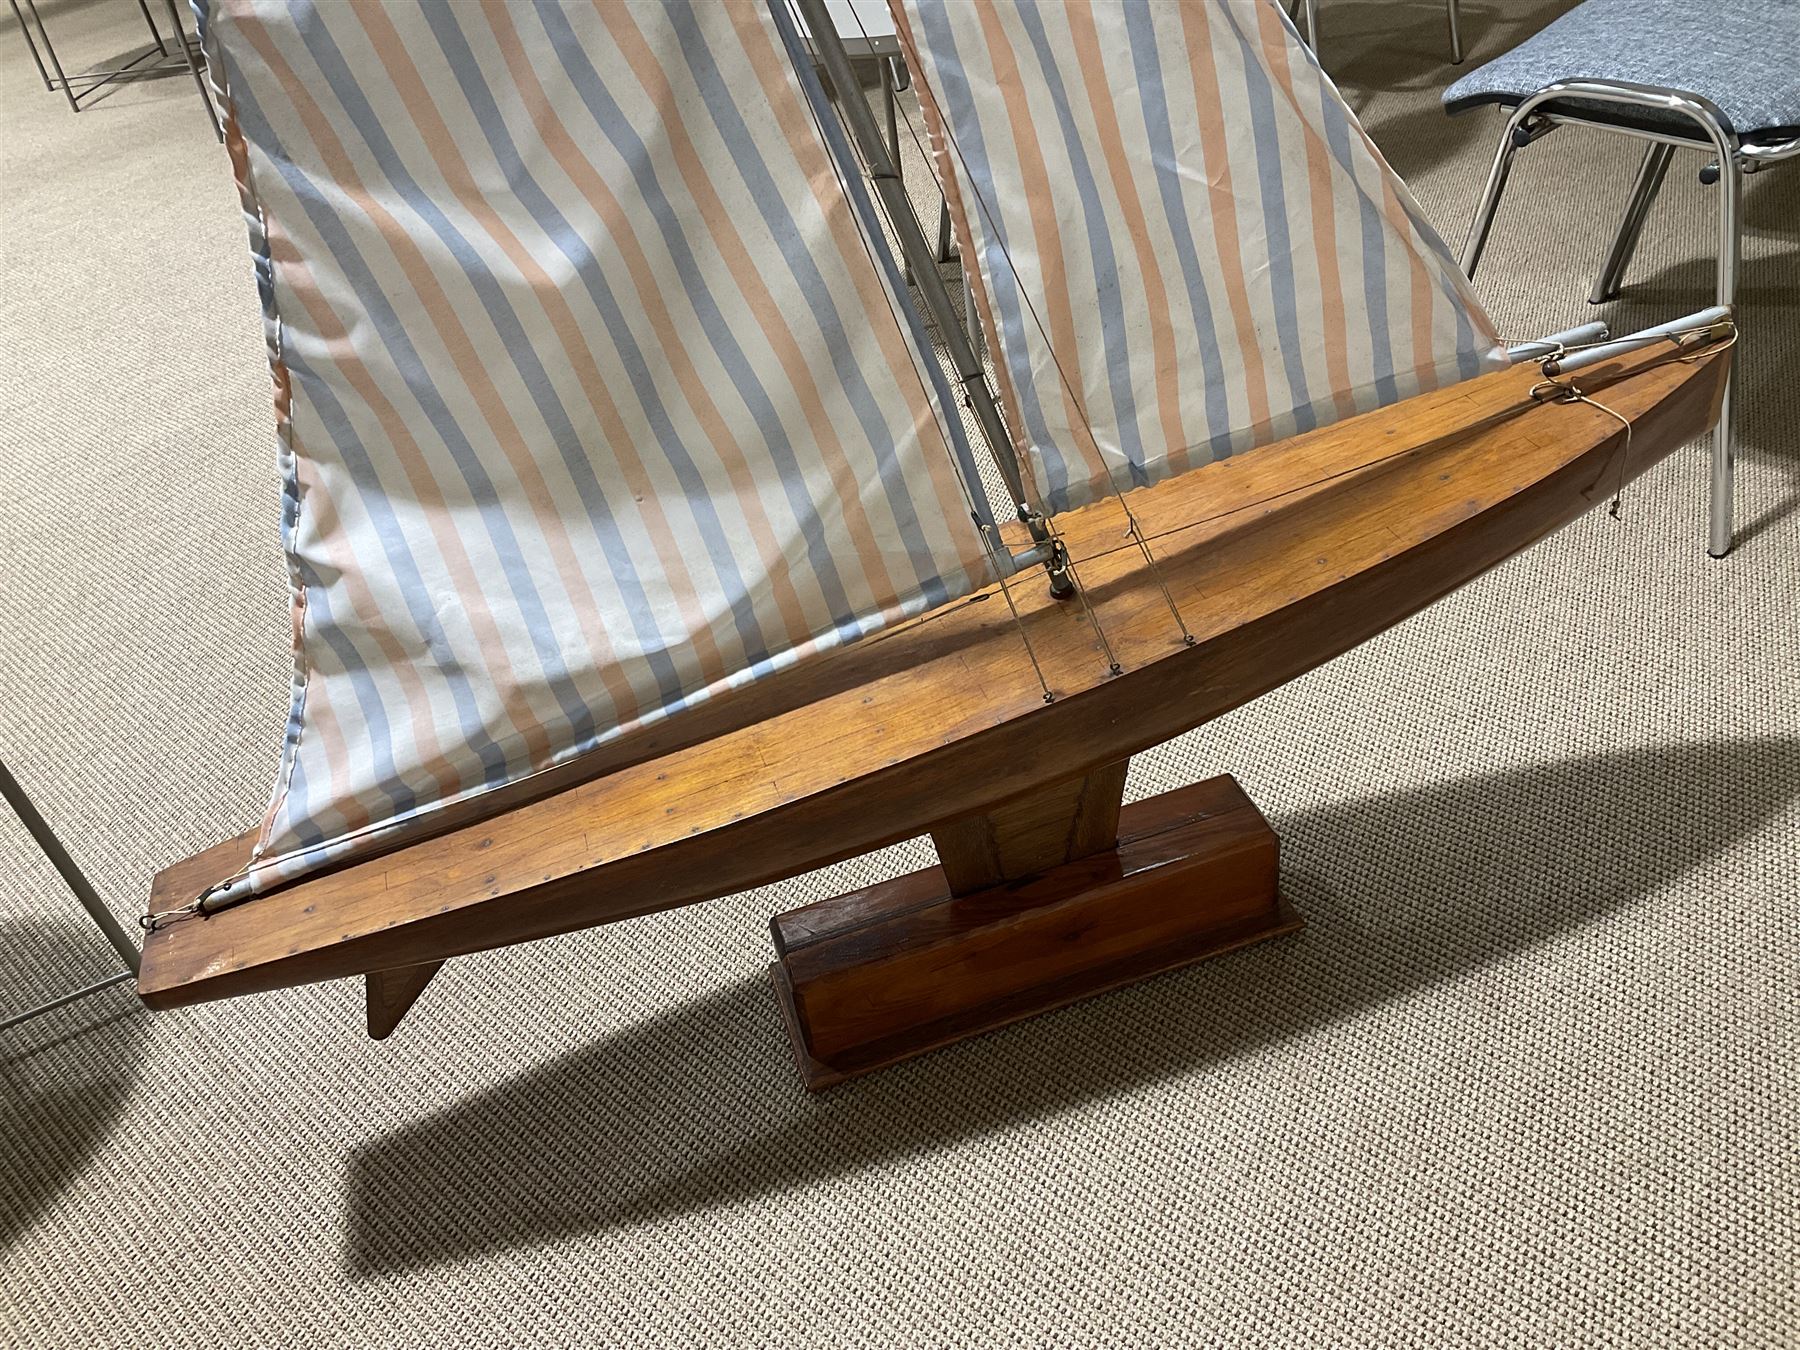 Large pond yacht with simulated planked mahogany deck - Image 8 of 12